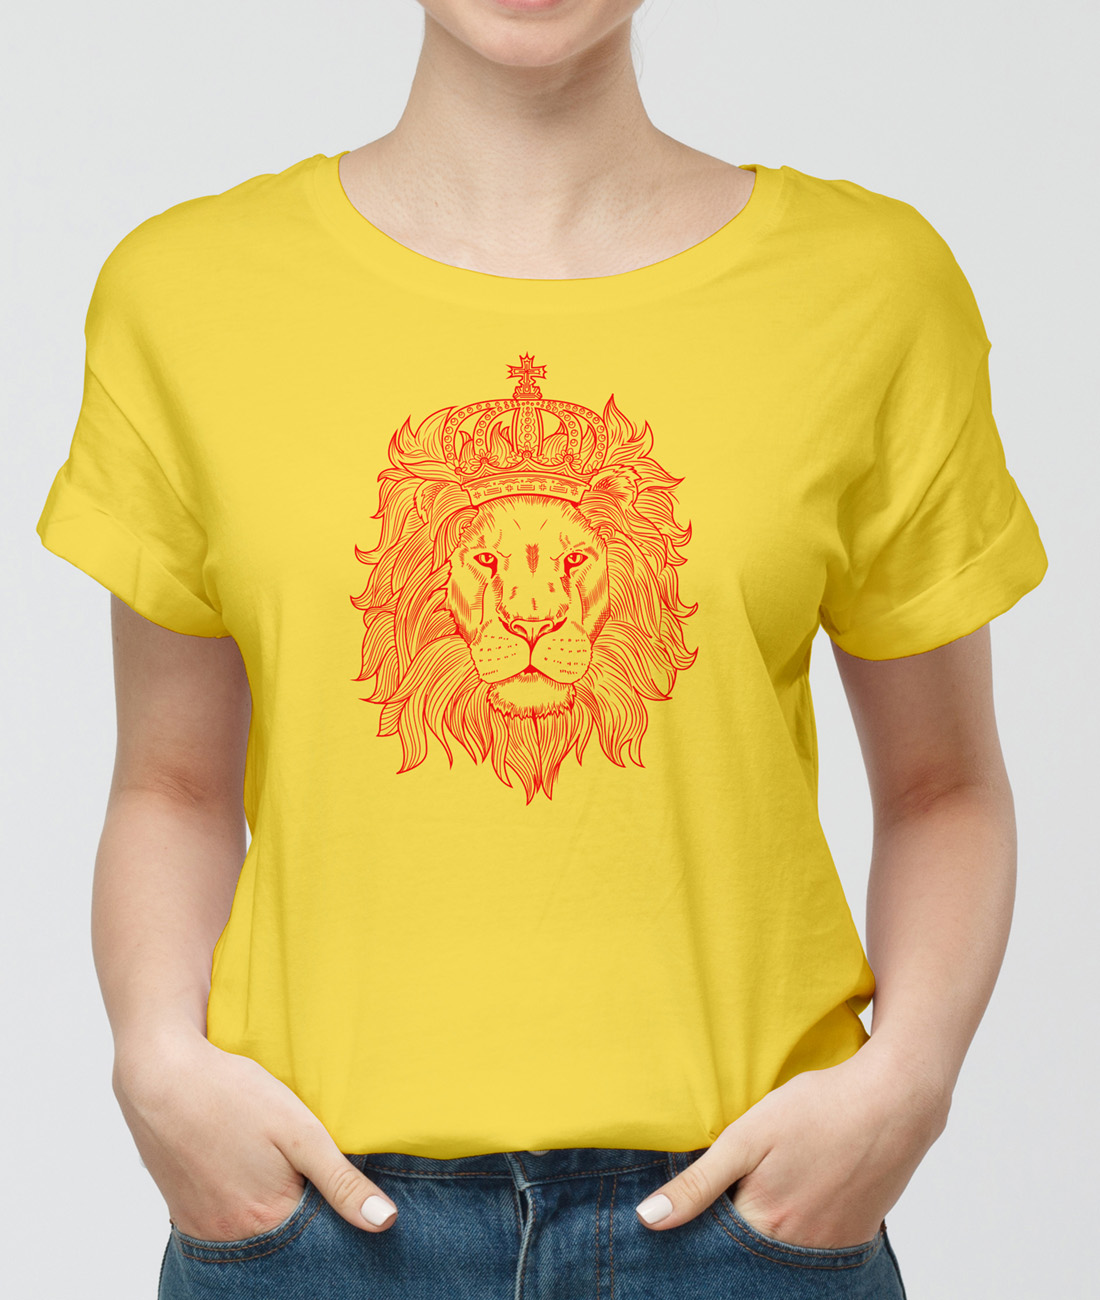 Tshirt with a lion T-shirt